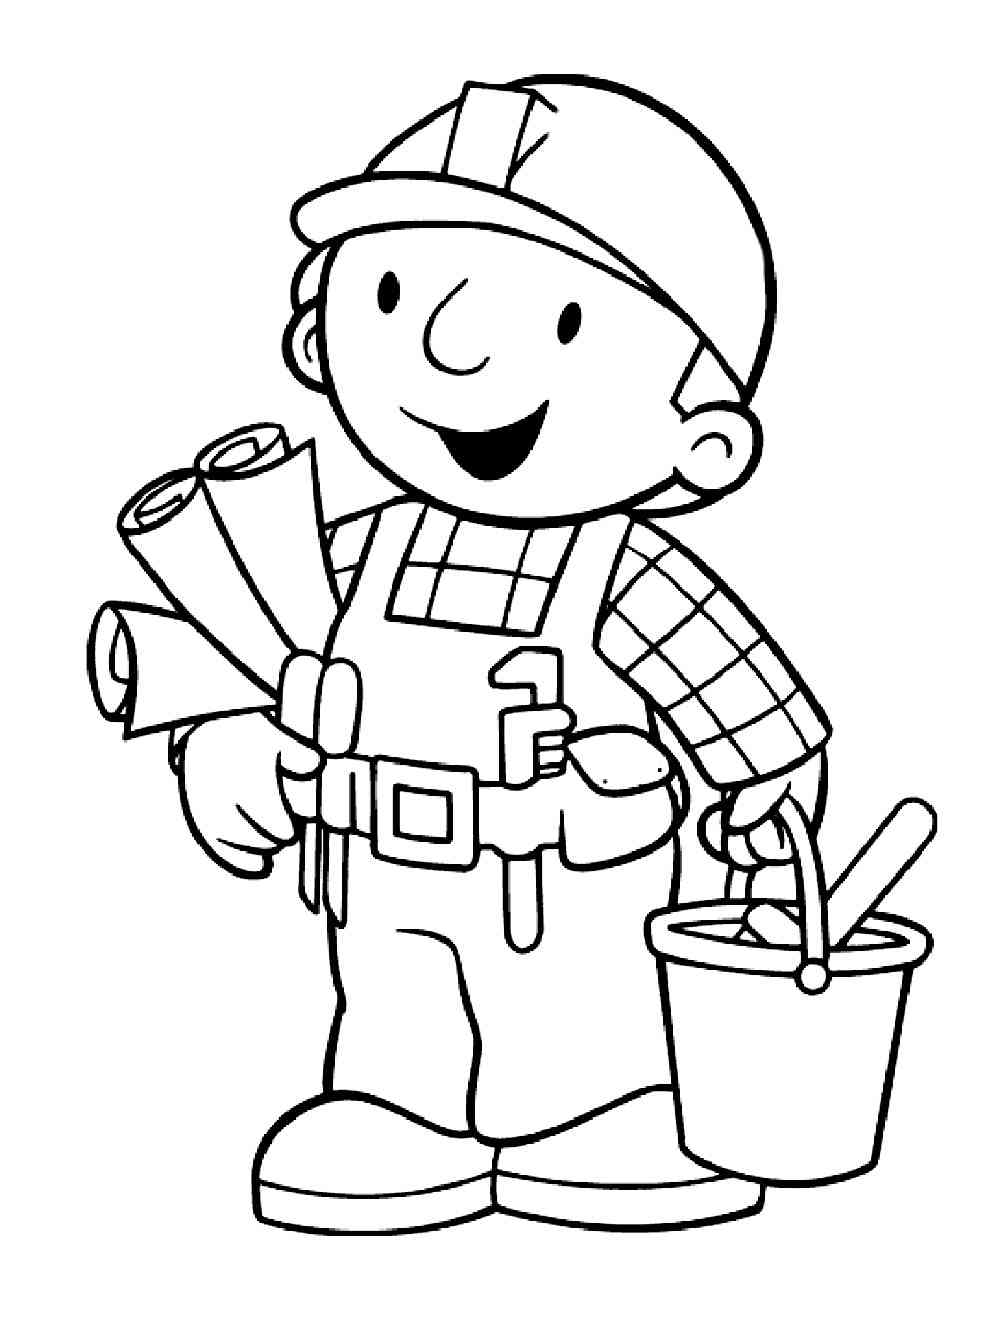 Bob The Builder 57 coloring page